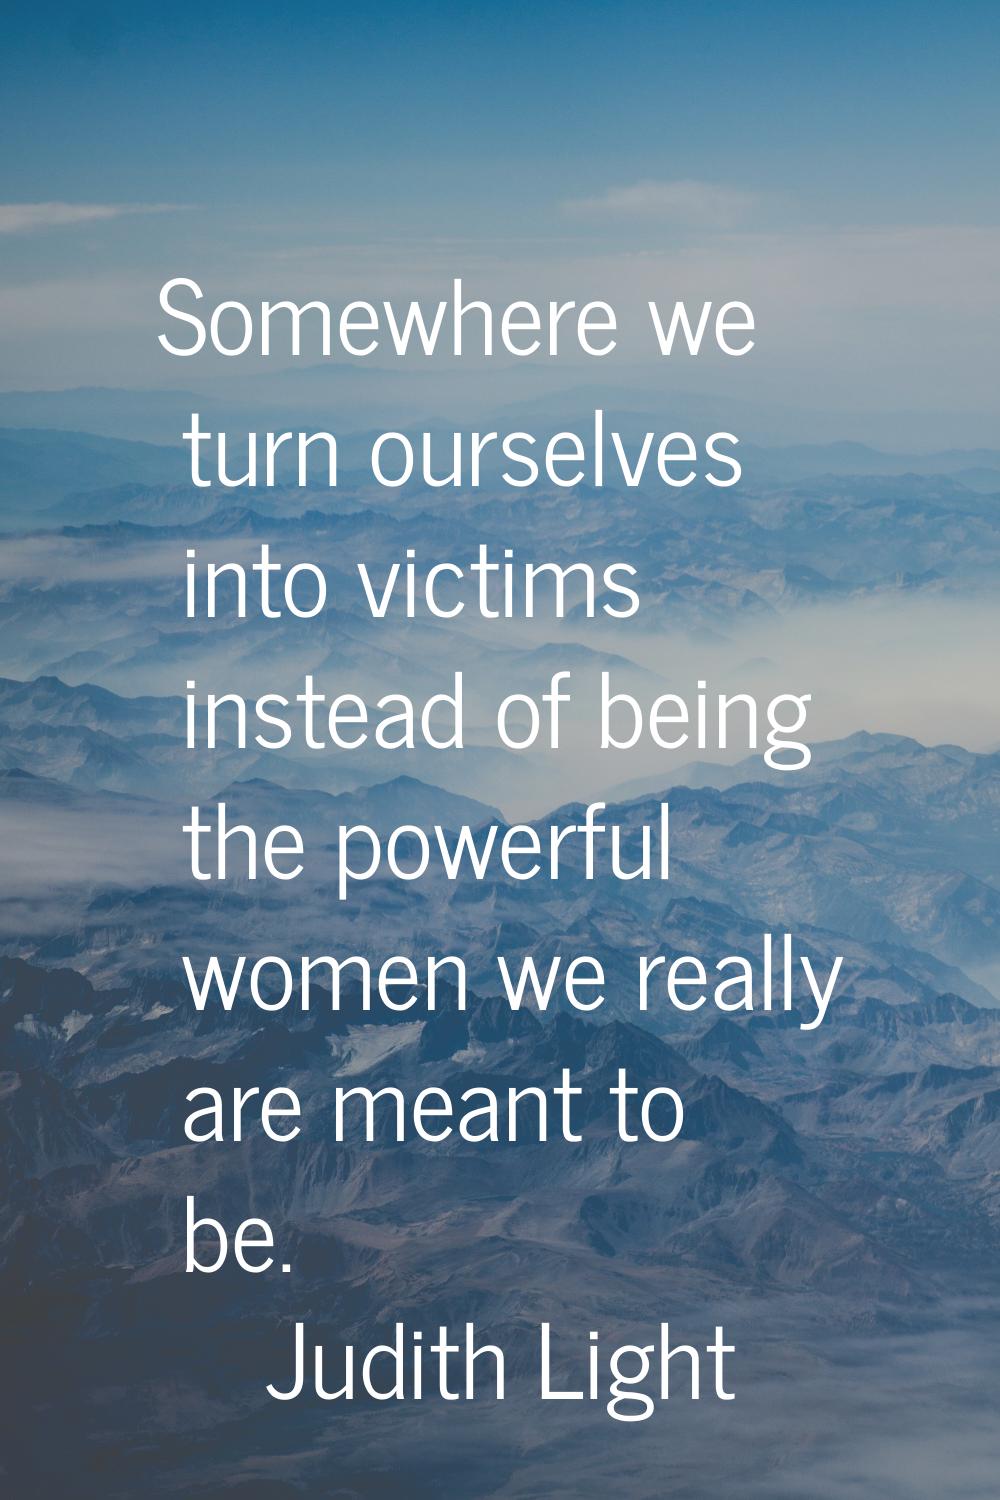 Somewhere we turn ourselves into victims instead of being the powerful women we really are meant to